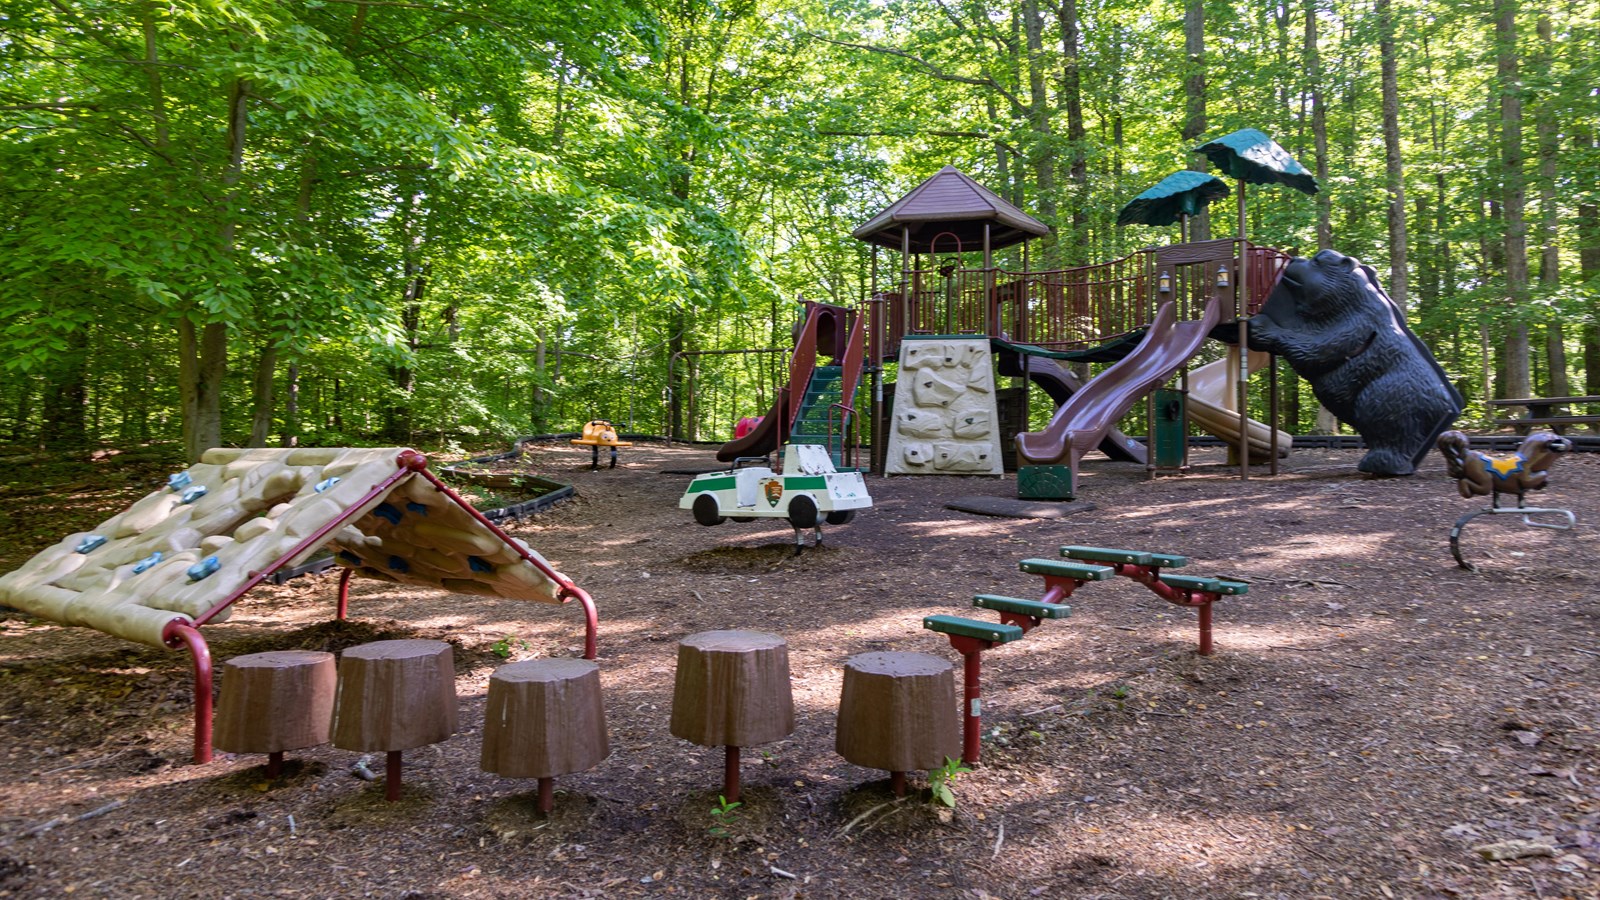 A playground with slides, ladders, monkey bars, and seesaws sits among trees.